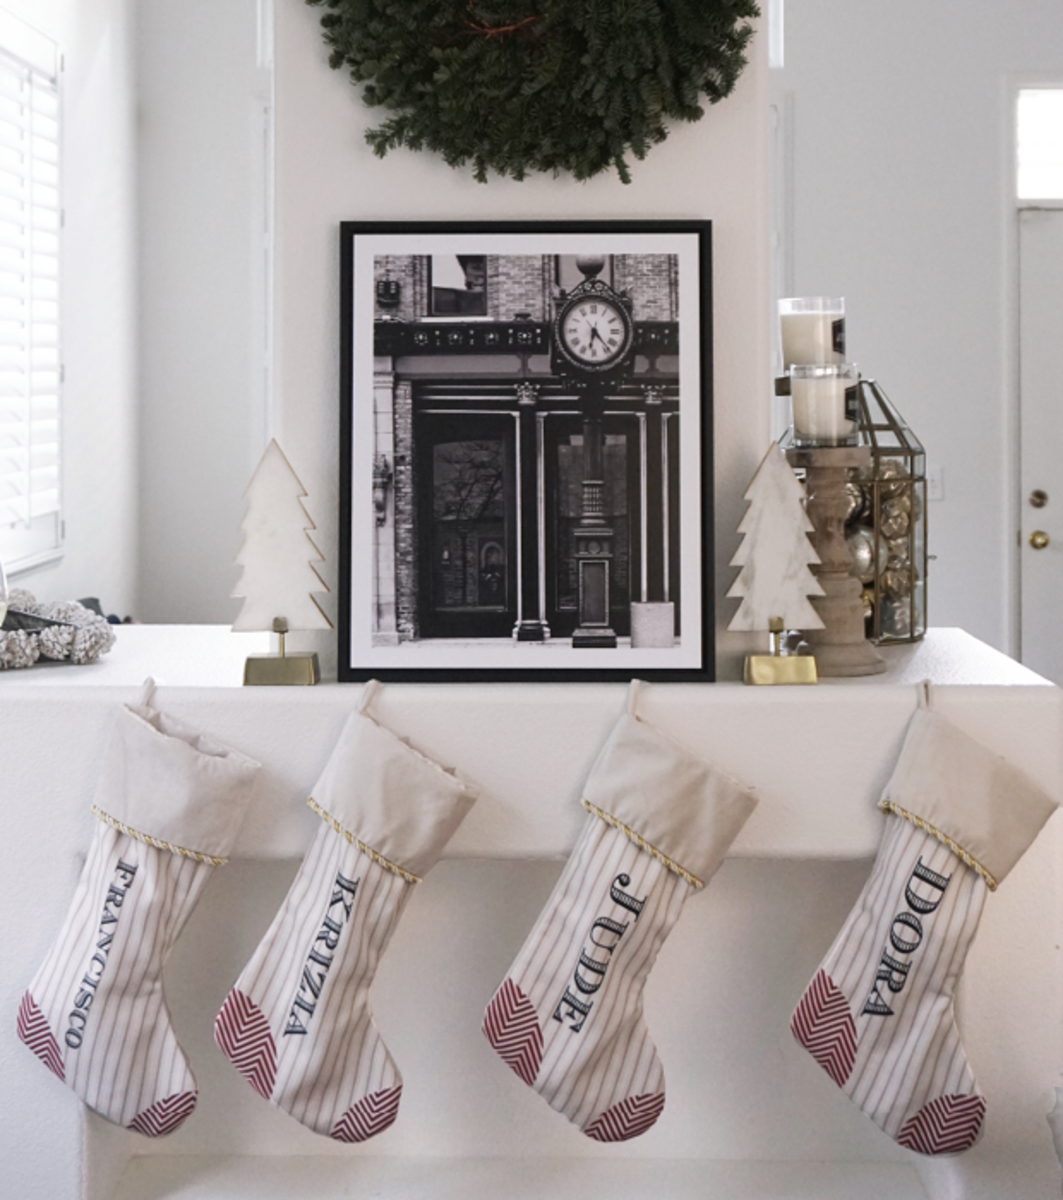 Deck the halls with eye-catching Shutterfly wall art, stockings for everyone, and personalized candles in scents that remind you of happy holidays.